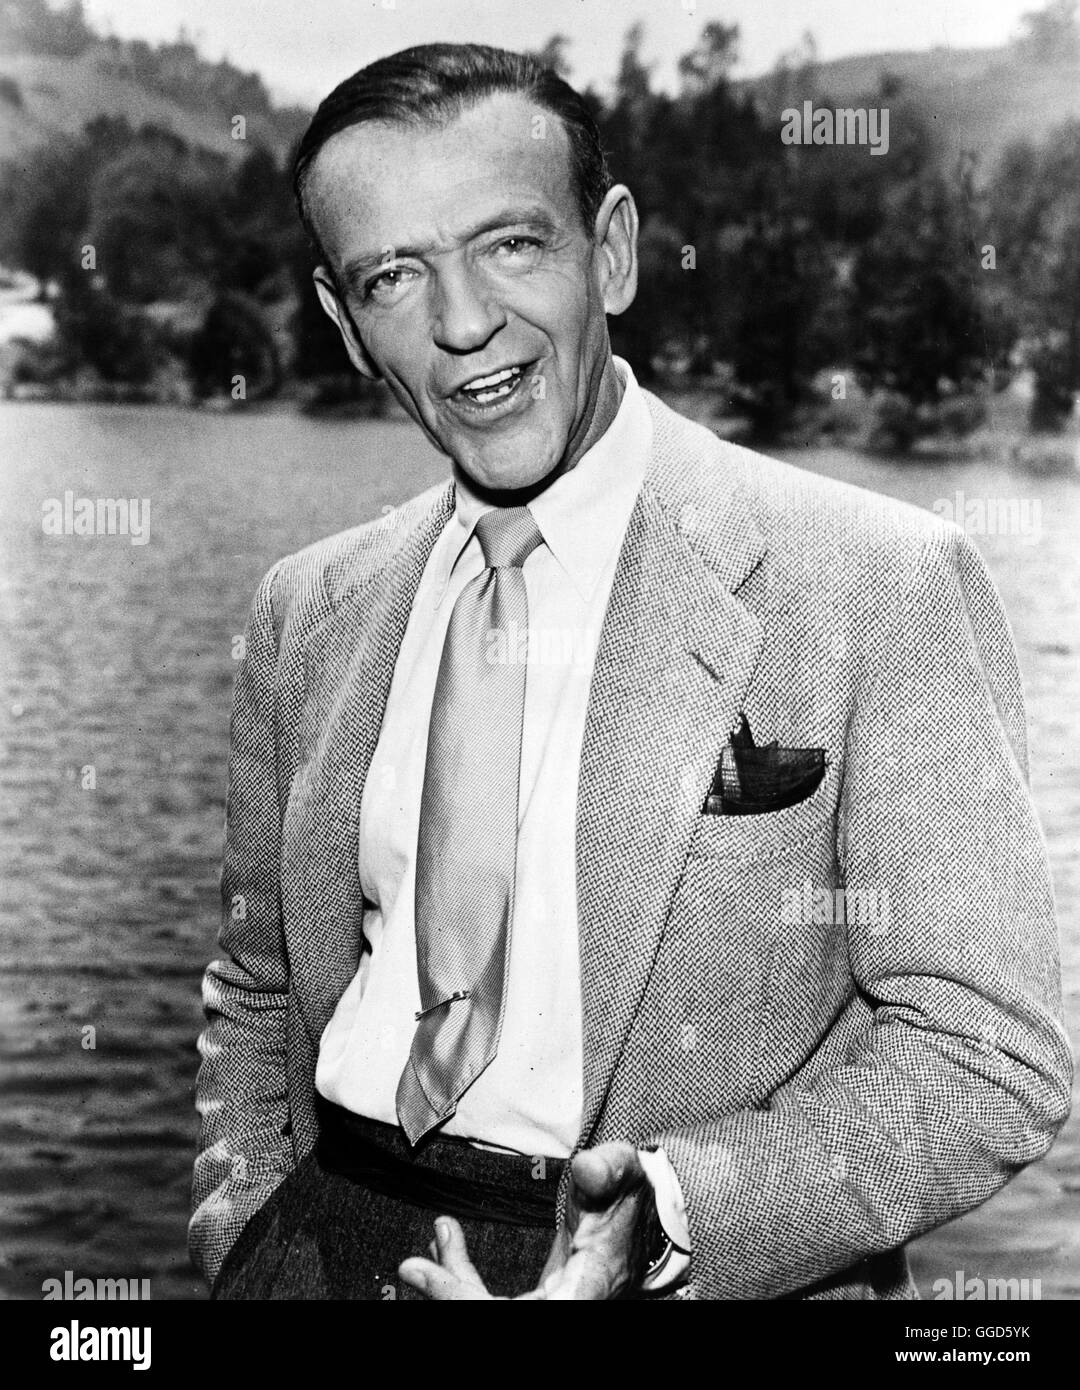 FRED ASTAIRE / FRED ASTAIRE Stock Photo